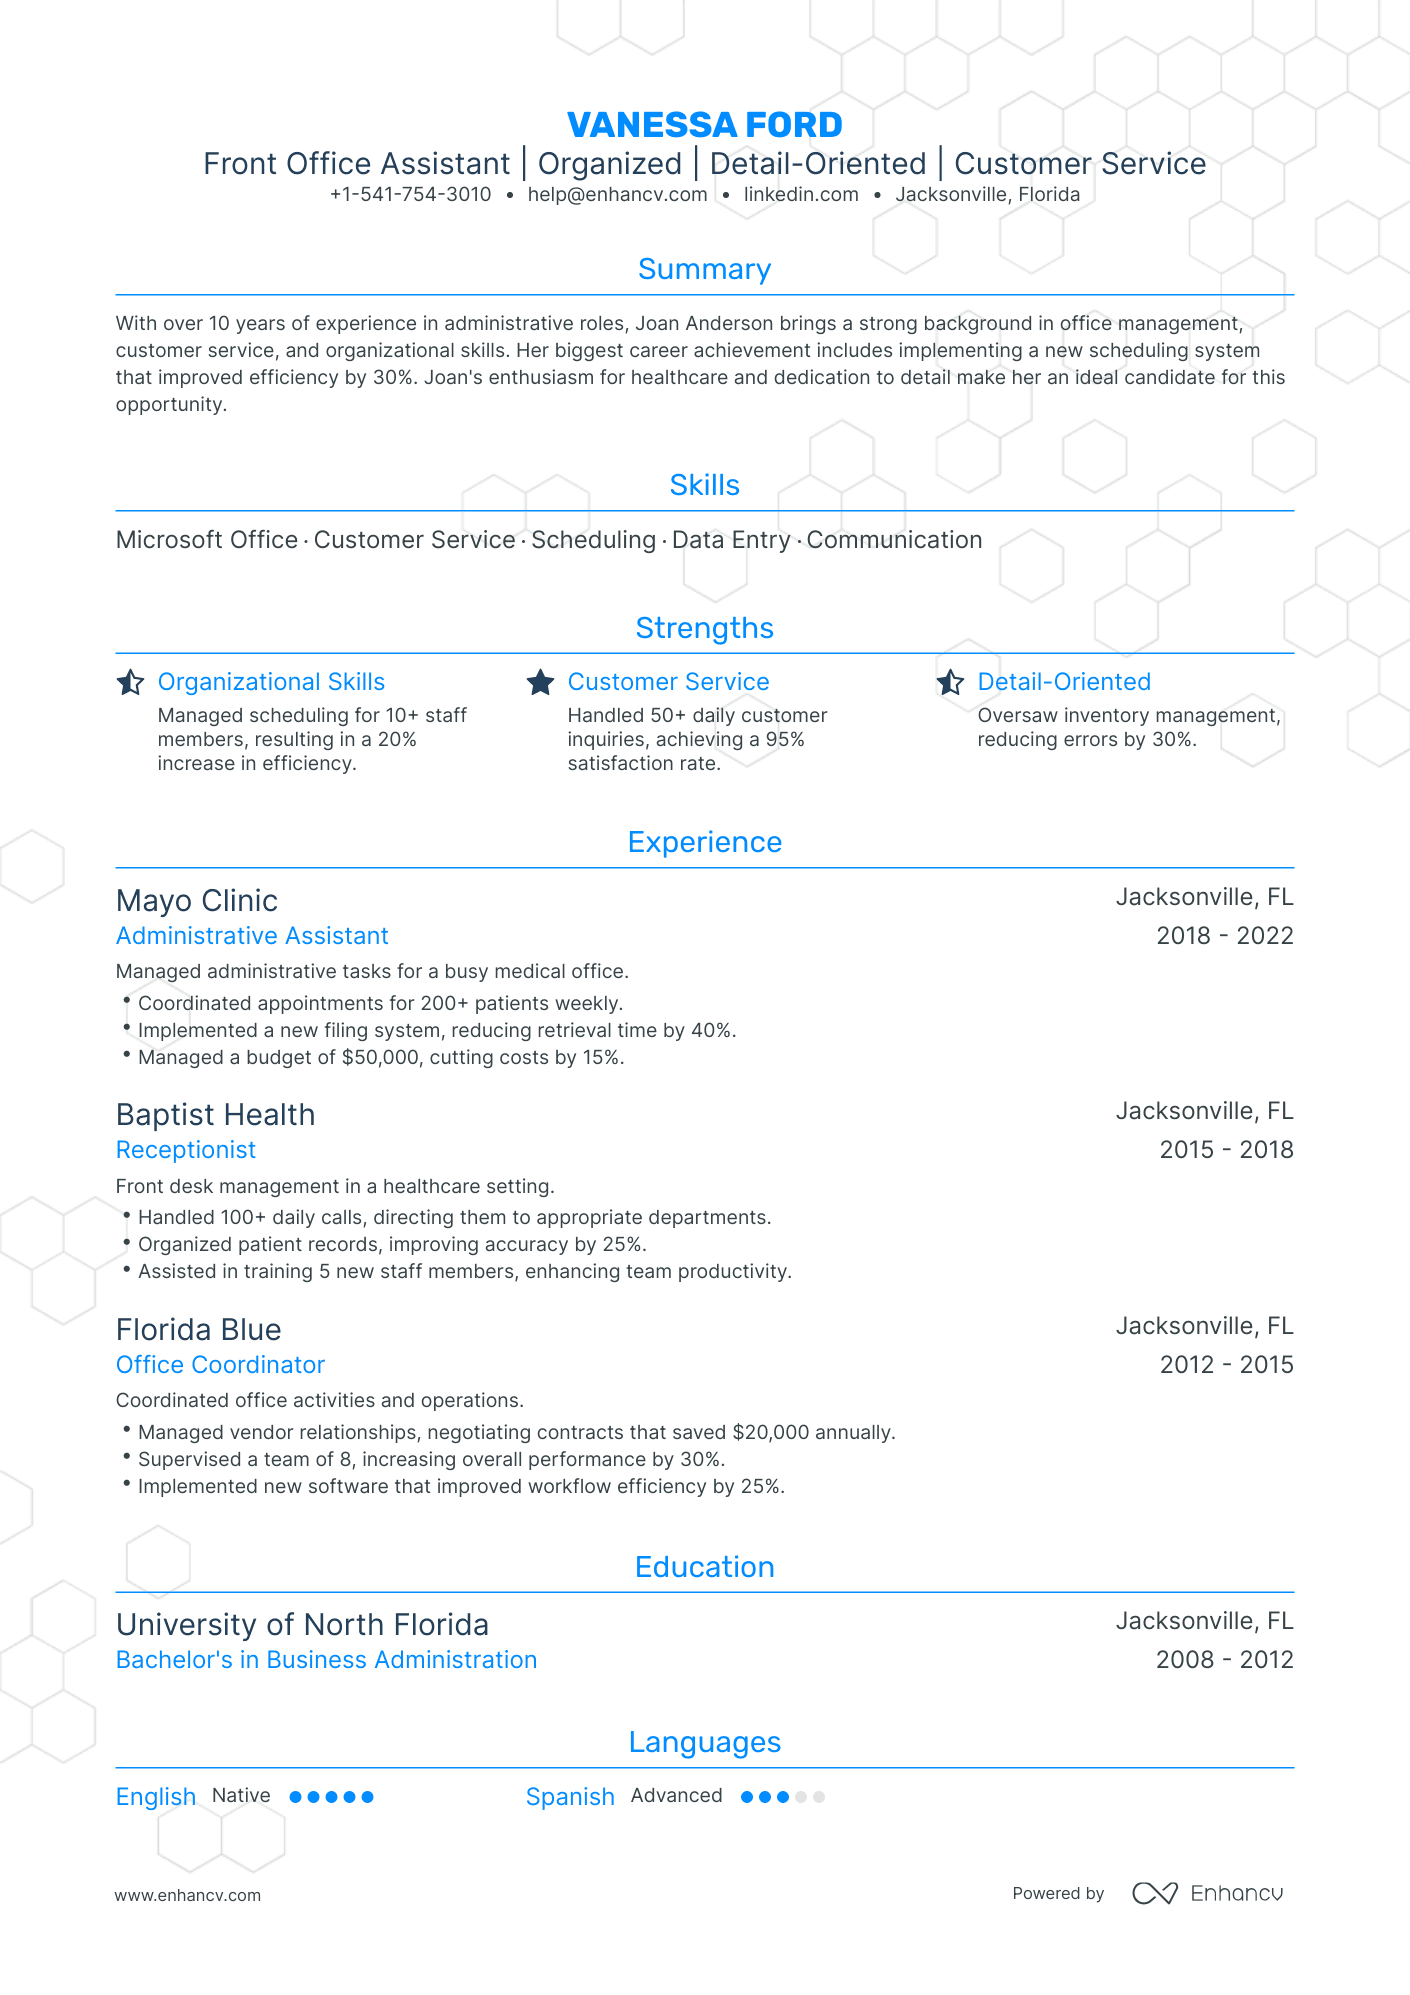 Traditional Office Assistant Resume Template